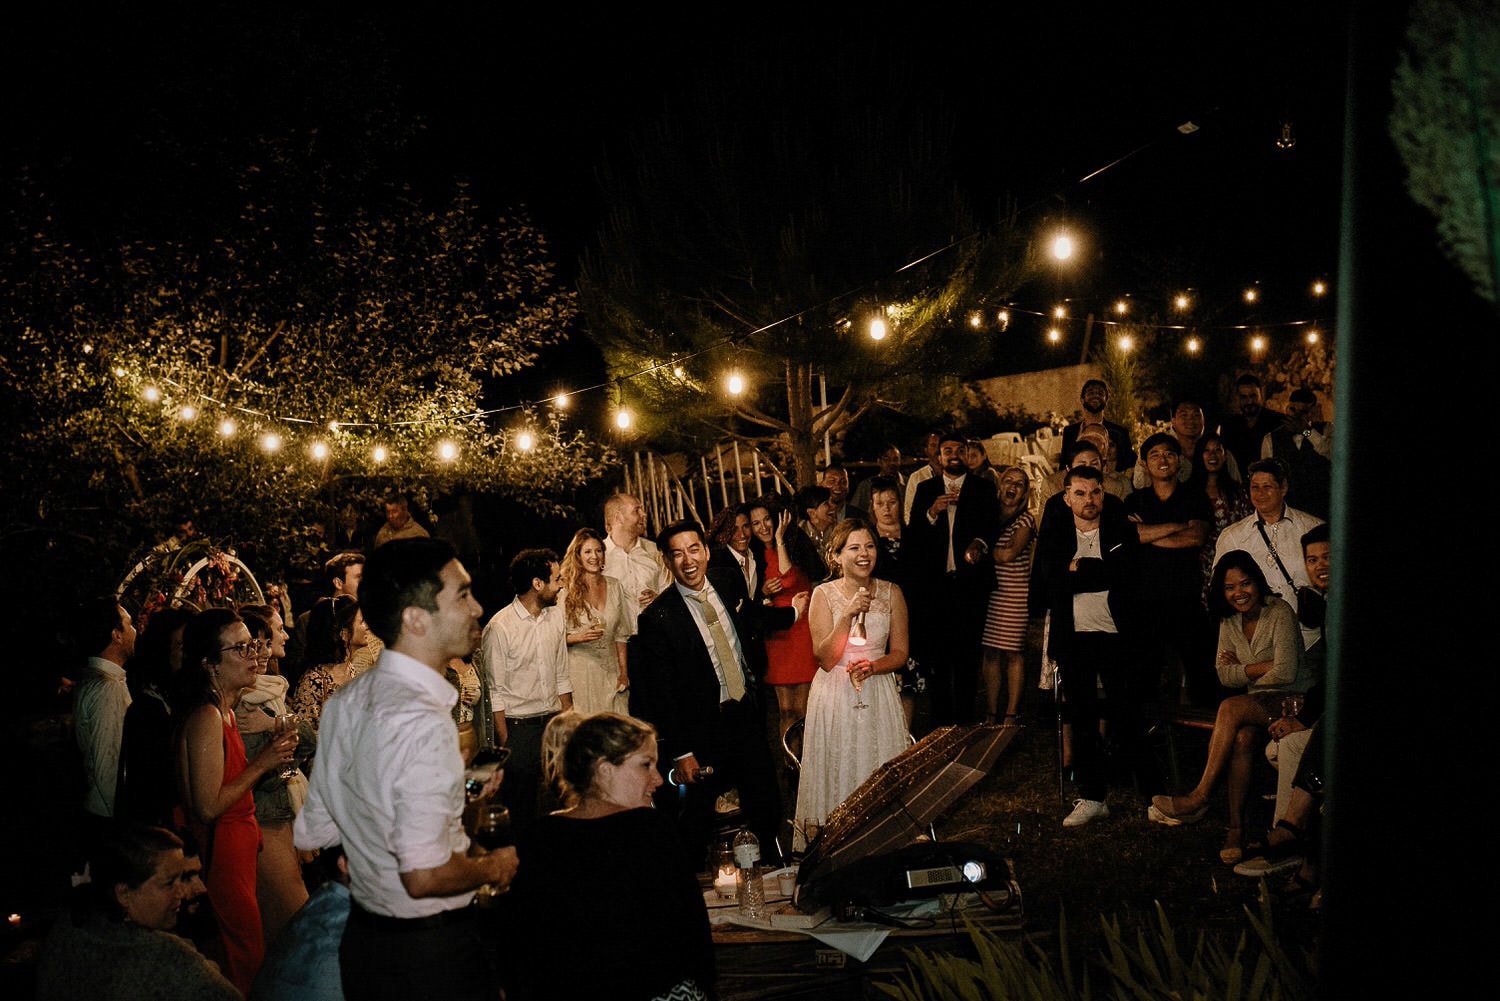 Charming Destination Wedding in the Portuguese Countryside - improvised karaoke night as a surprise from the guests